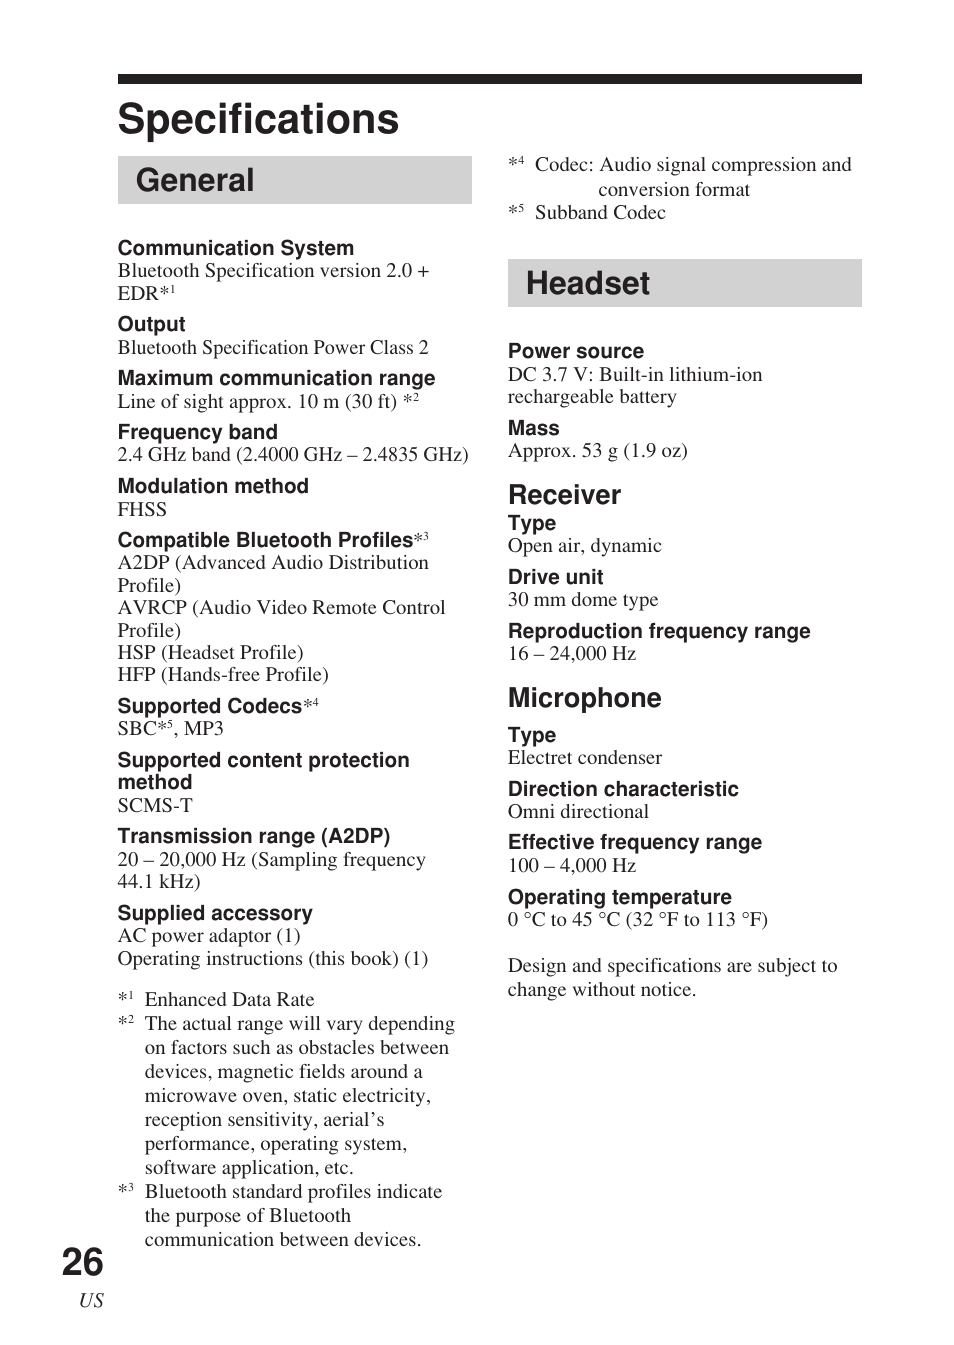 Specifications, Headset, General | Receiver, Microphone | Sony DR-BT140Q Manuel d'utilisation | Page 26 / 56